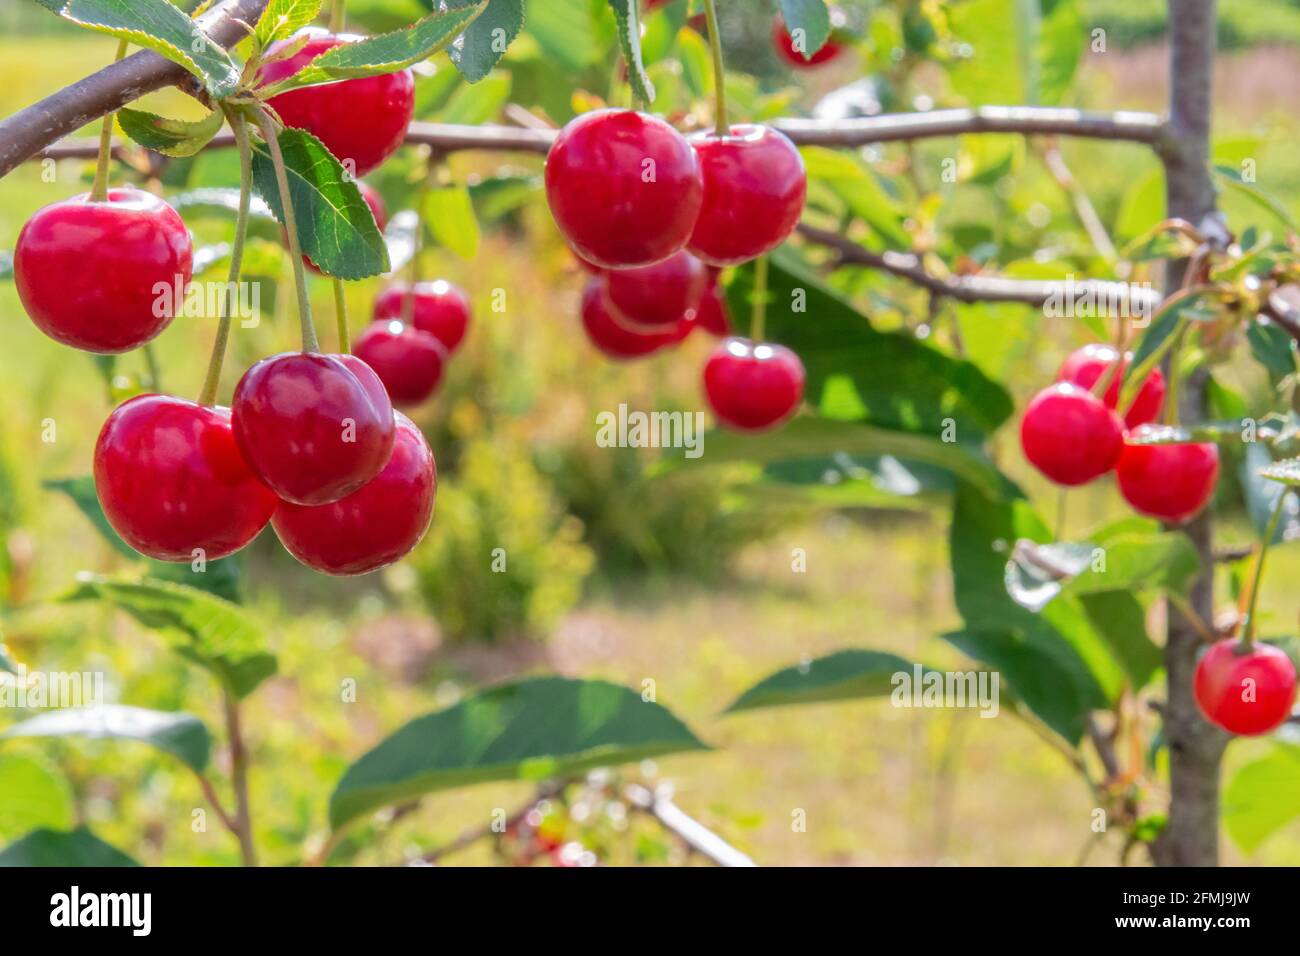 https://c8.alamy.com/comp/2FMJ9JW/fresh-red-cherry-berries-on-tree-branch-in-garden-close-up-view-of-the-organic-cherry-berry-hanging-on-twigs-mature-red-berries-of-cherry-tree-2FMJ9JW.jpg